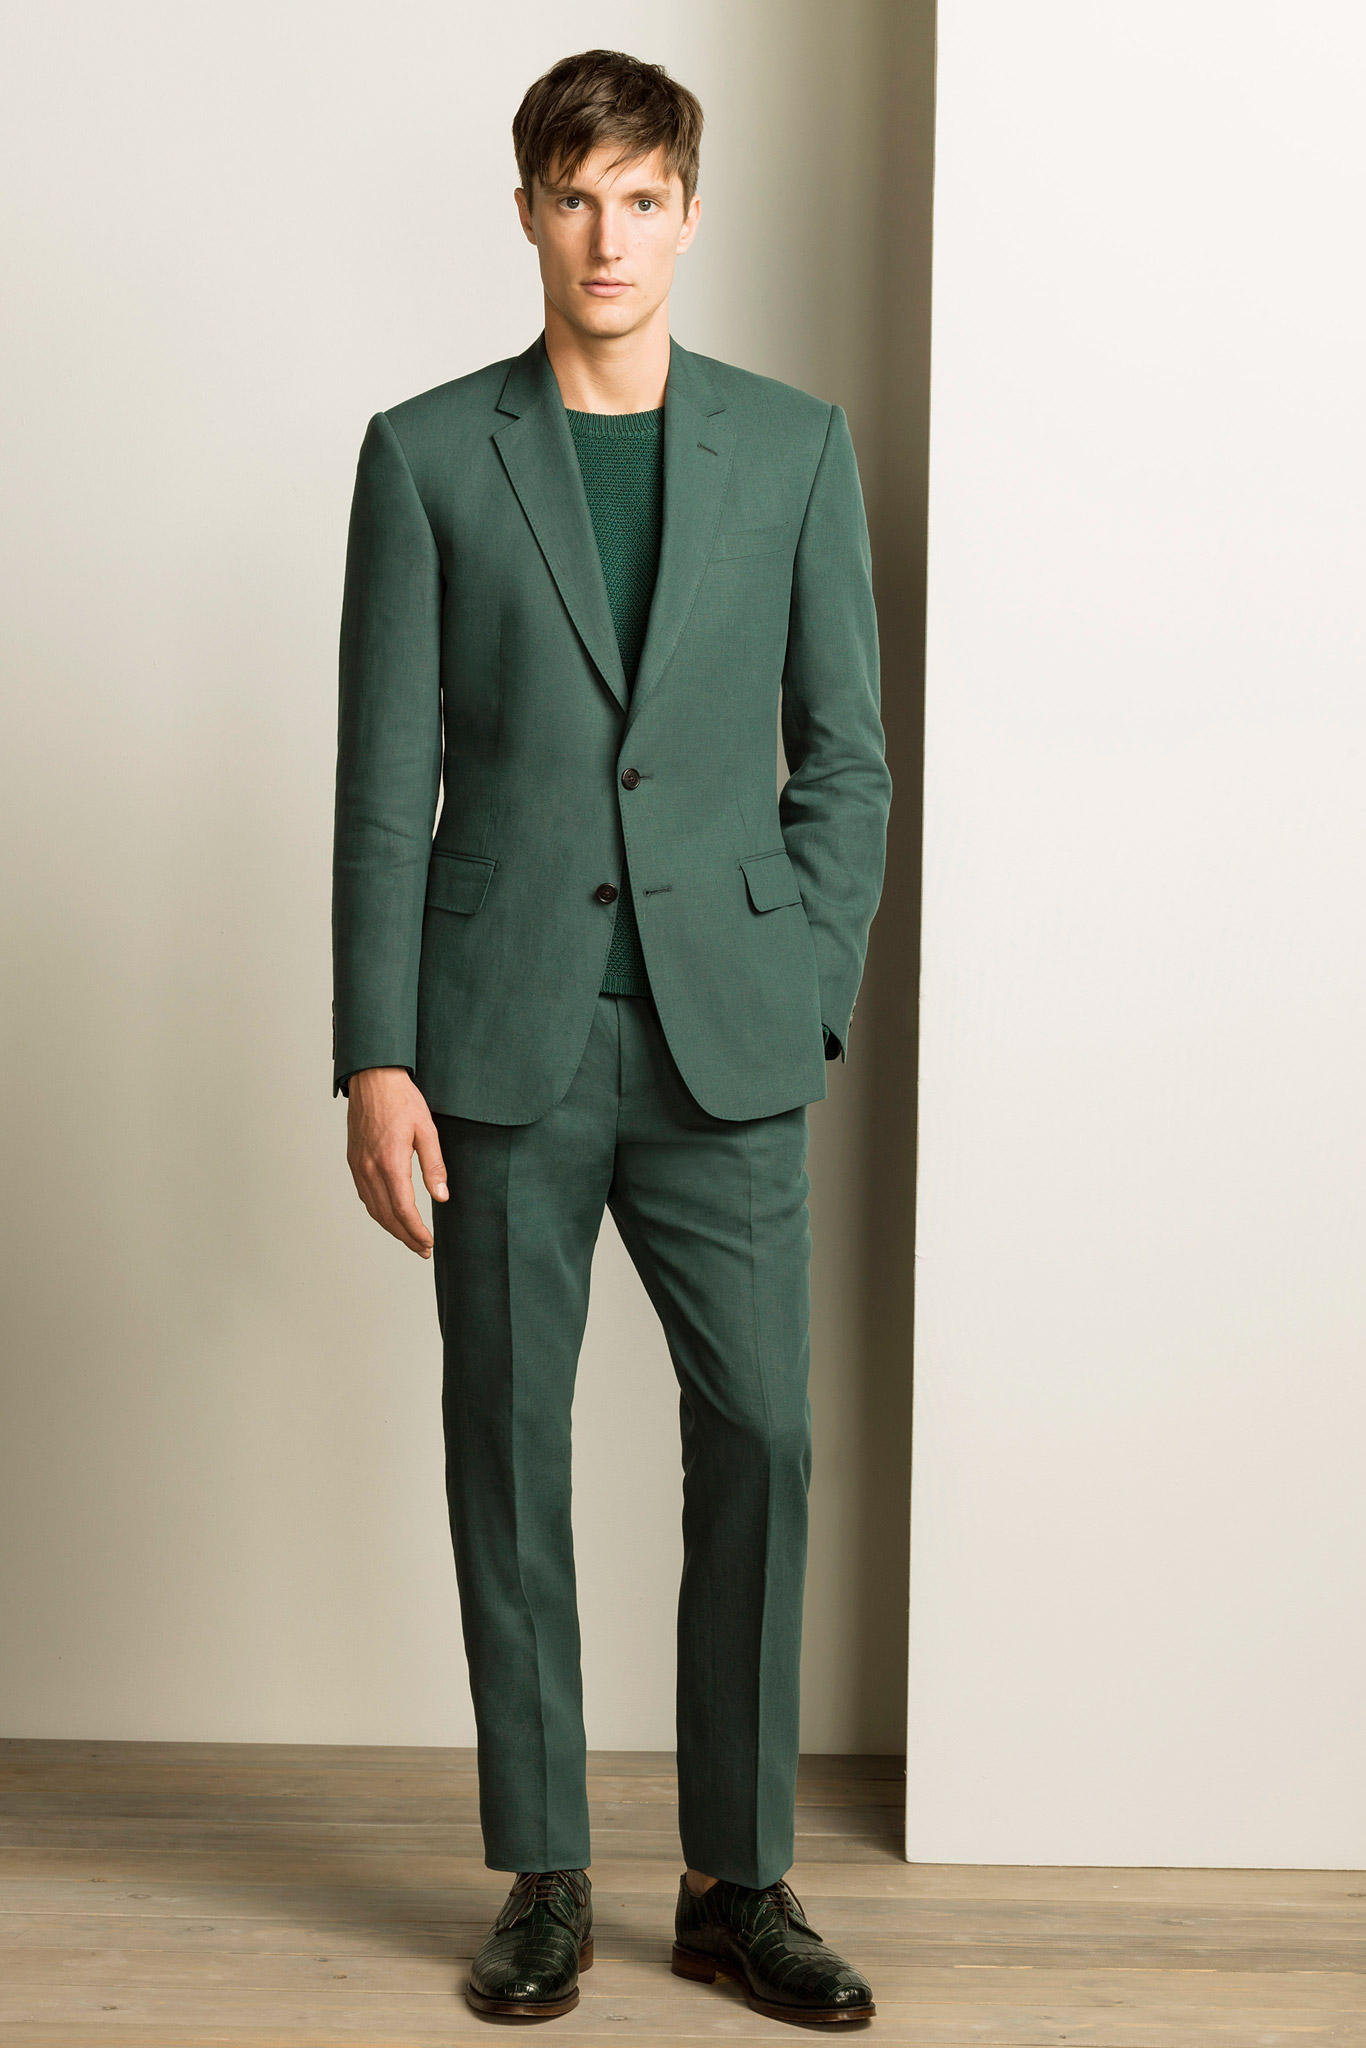 Gieves & Hawkes Spring 2016 Collection | MiKADO